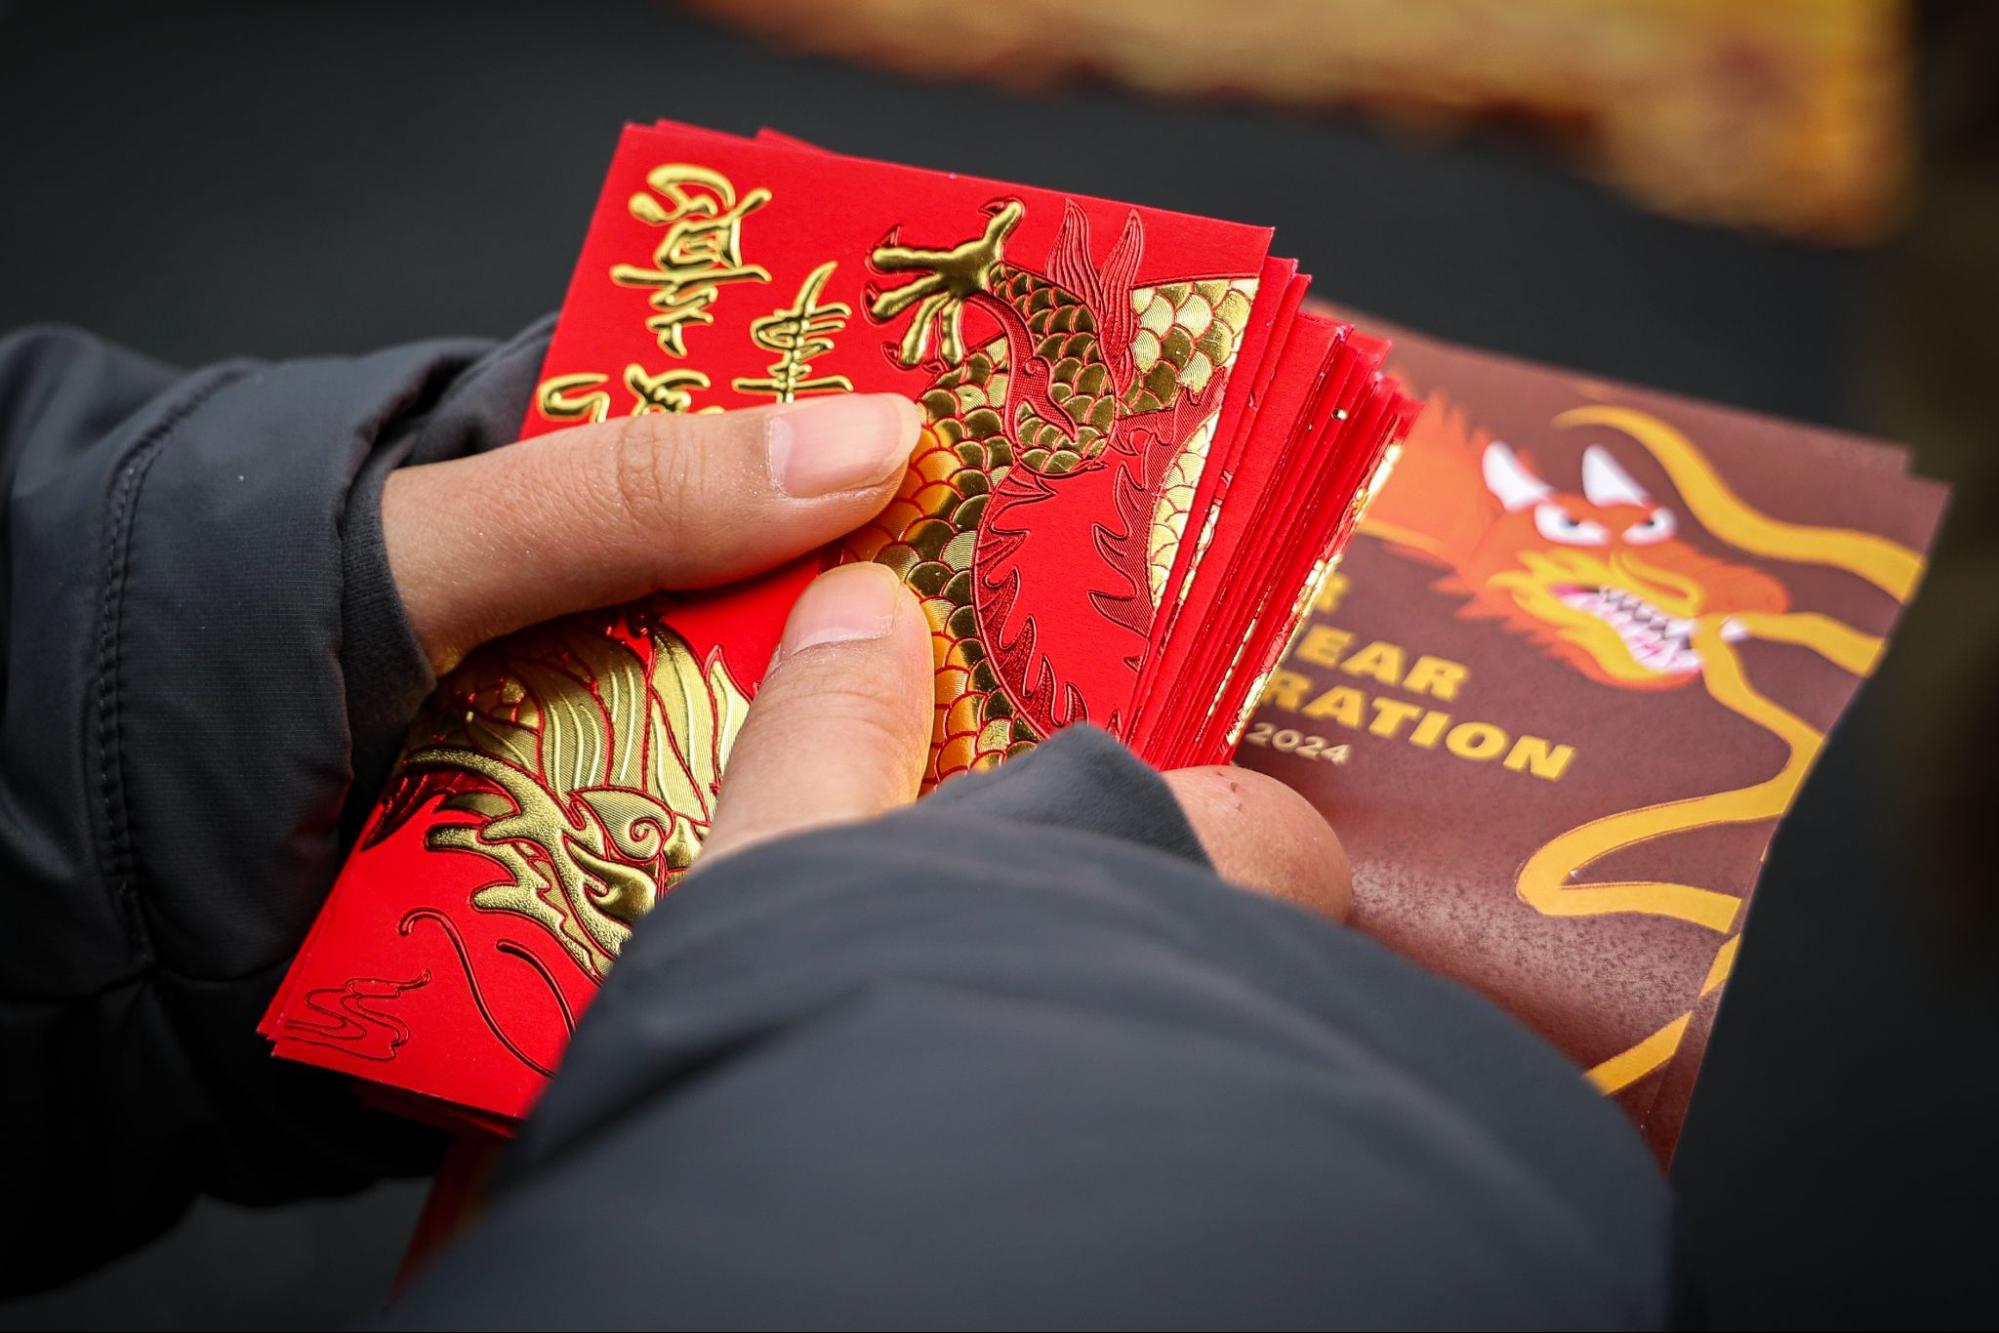 A close-up shot of a person’s hands holding red envelopes with dragon designs.